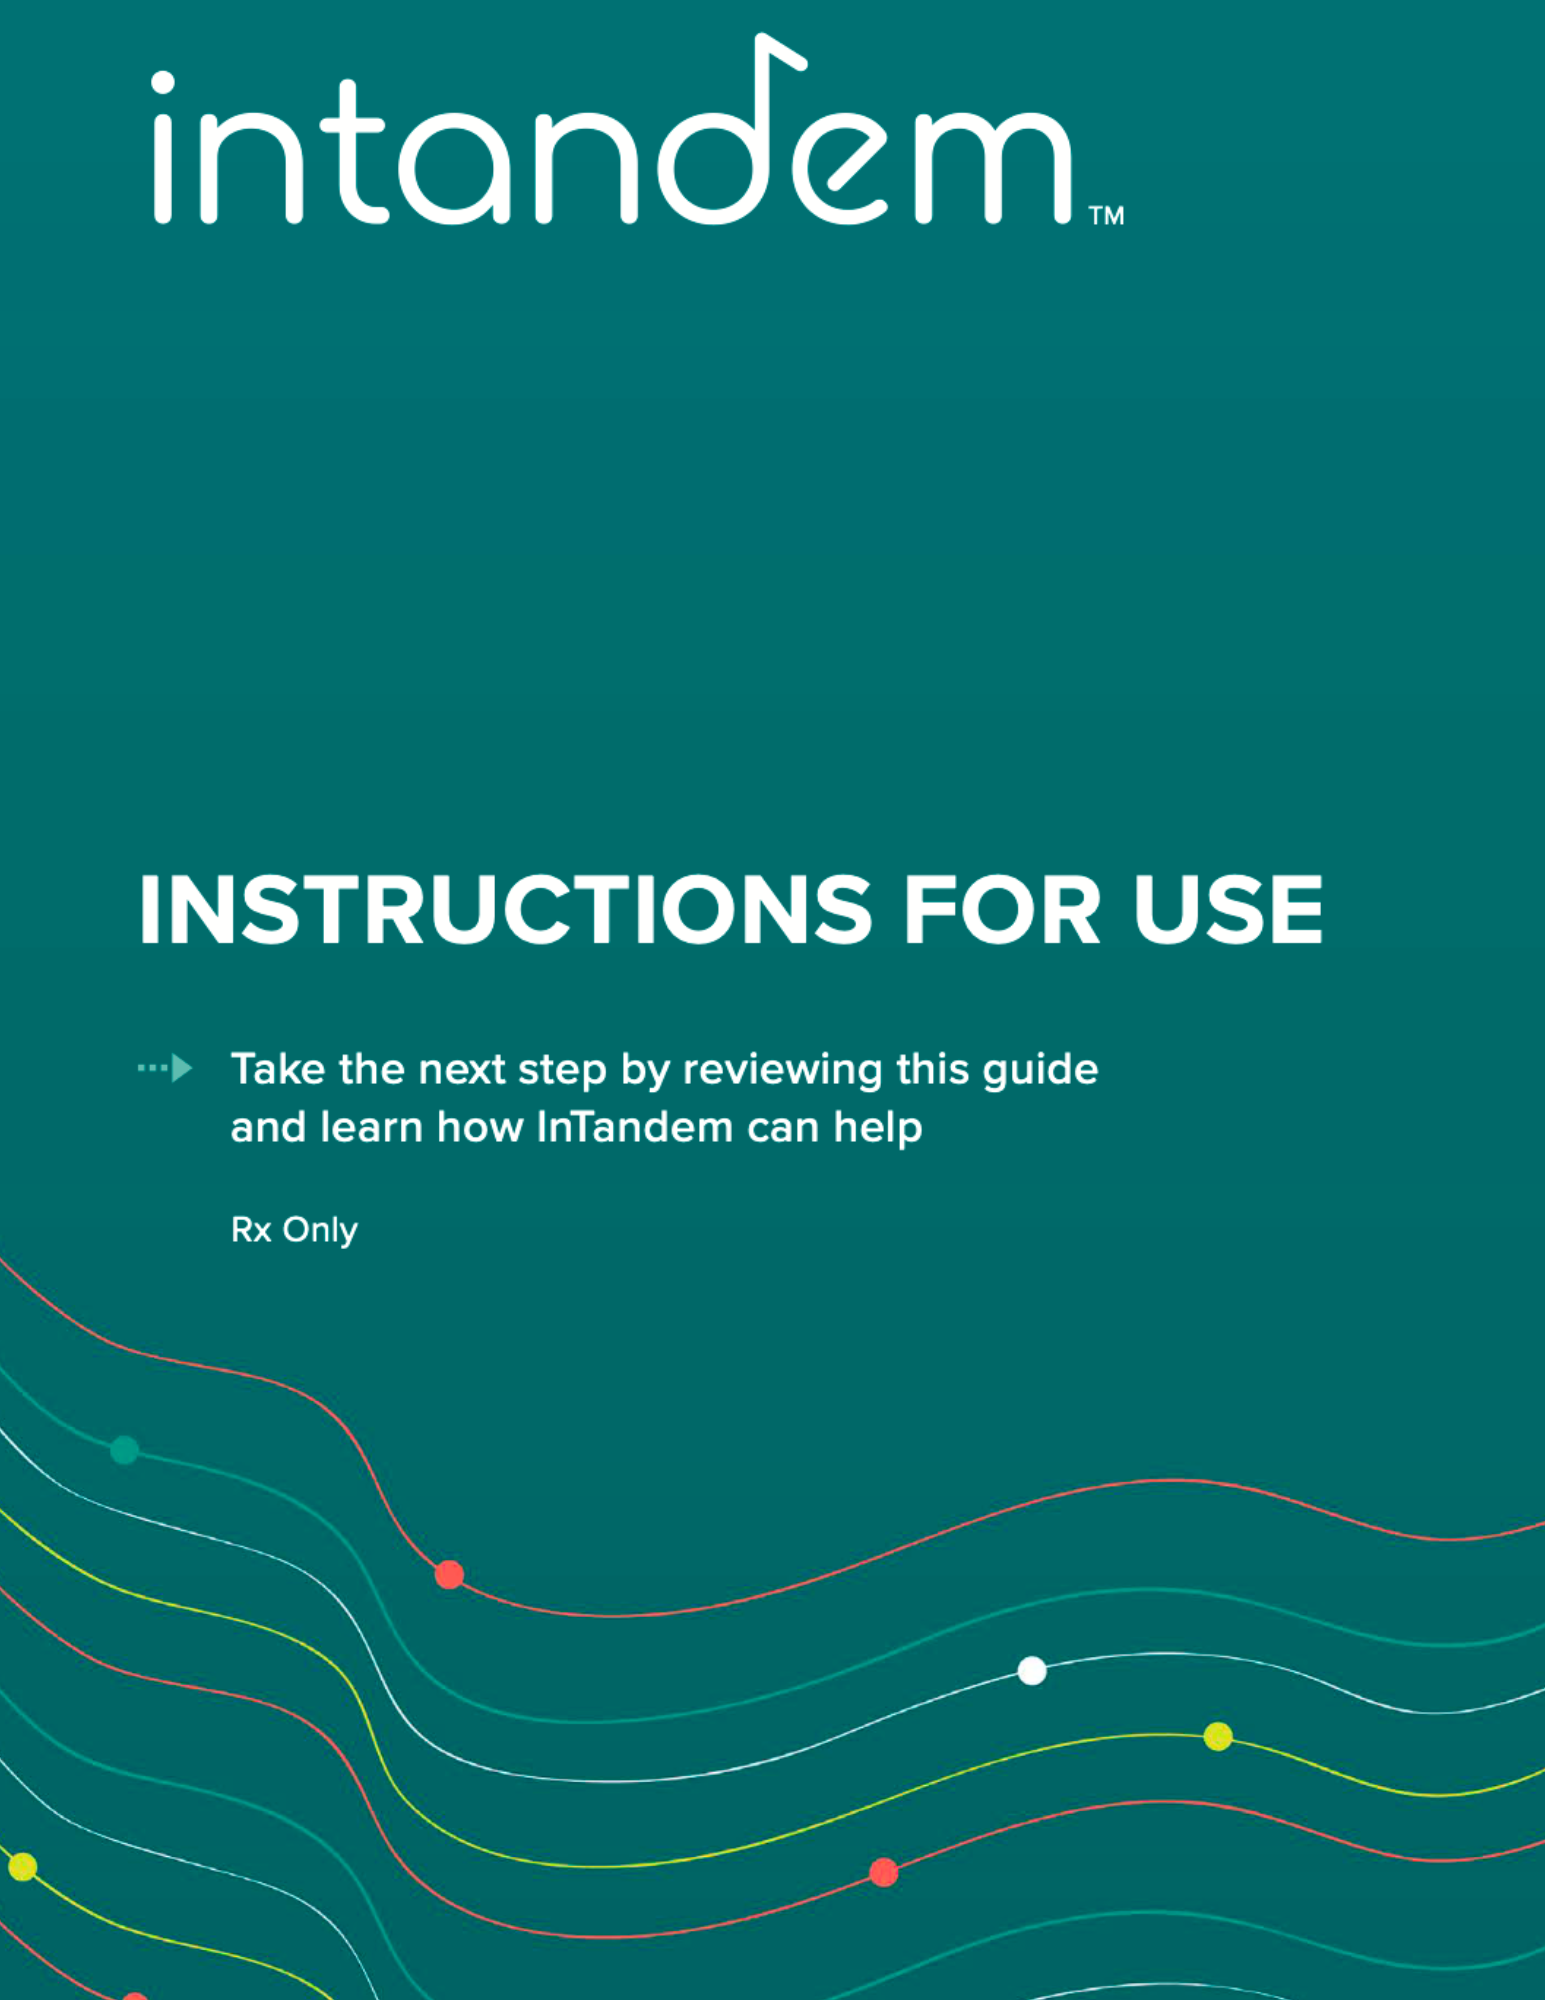 A link to the InTandem Instructions for Use in both English and Spanish